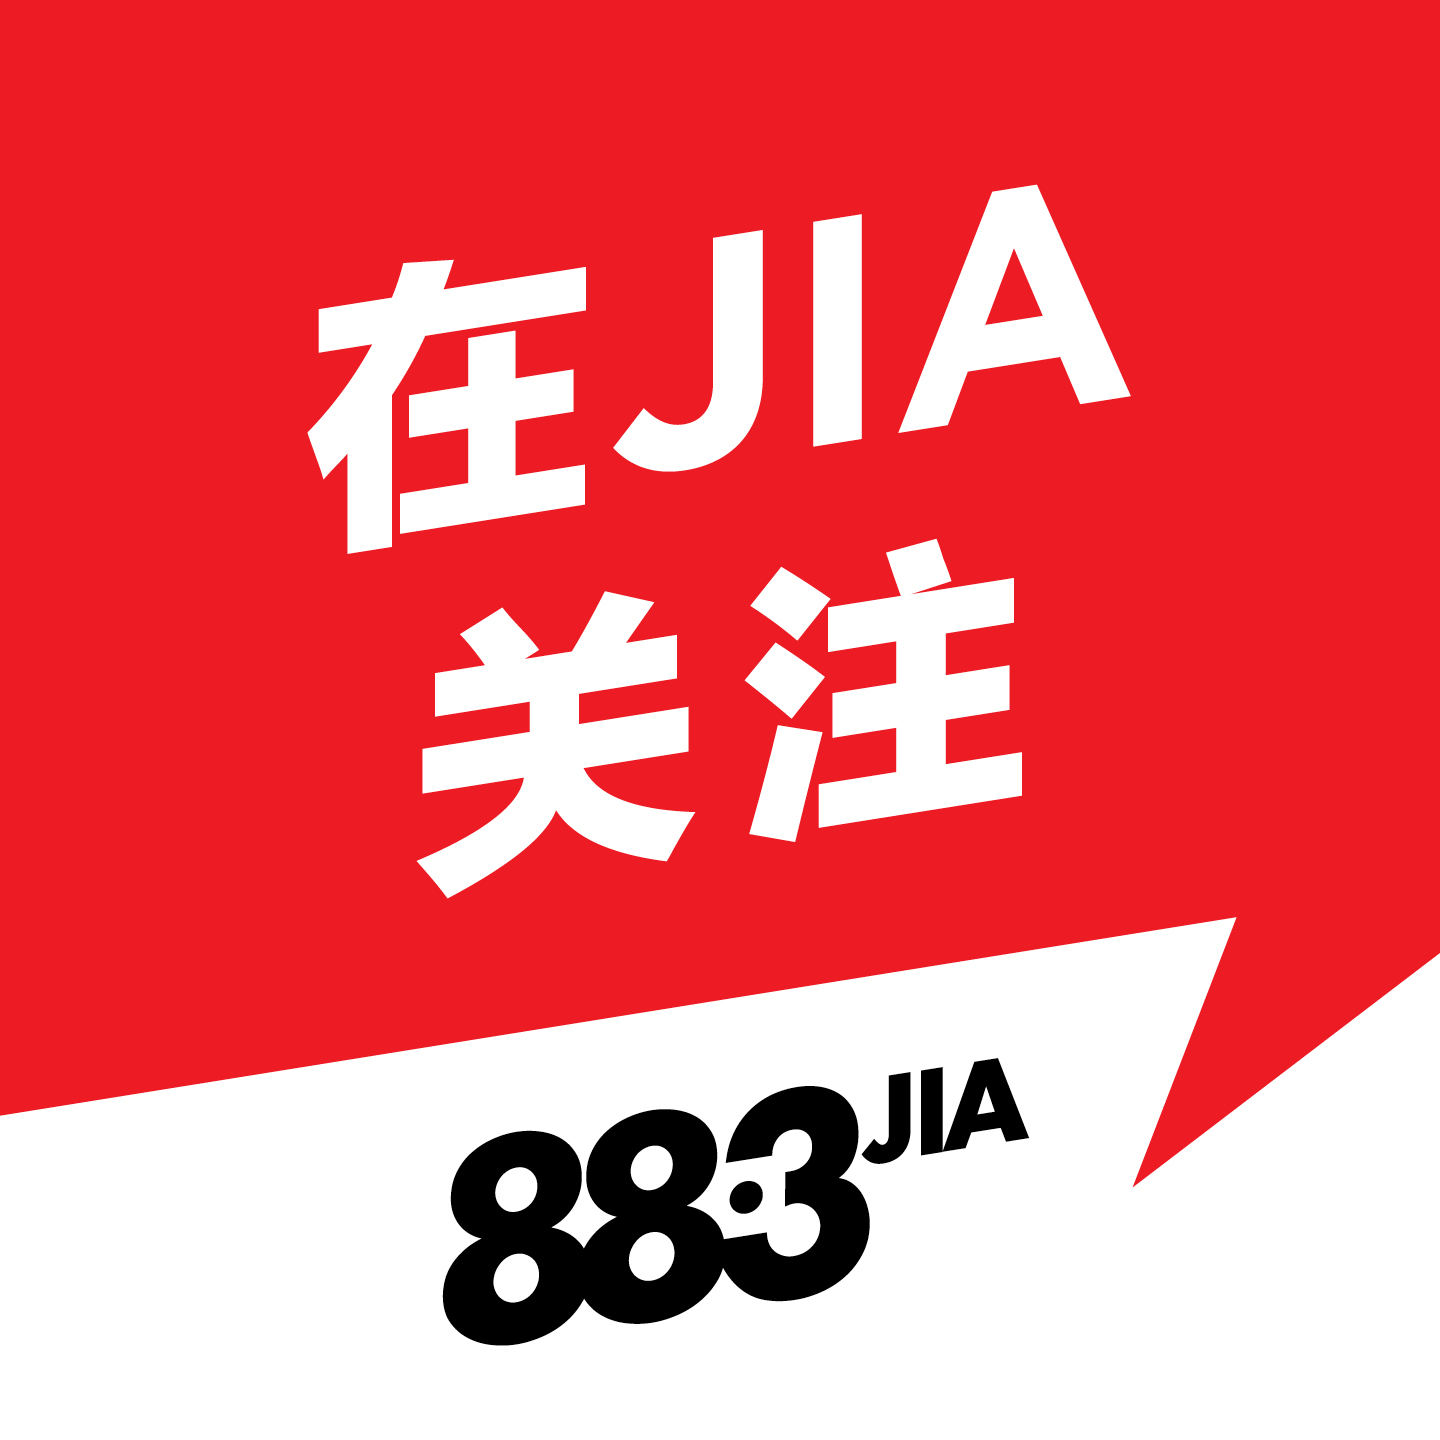 5PM - 88.3JIA DATING TRENDS IN SG